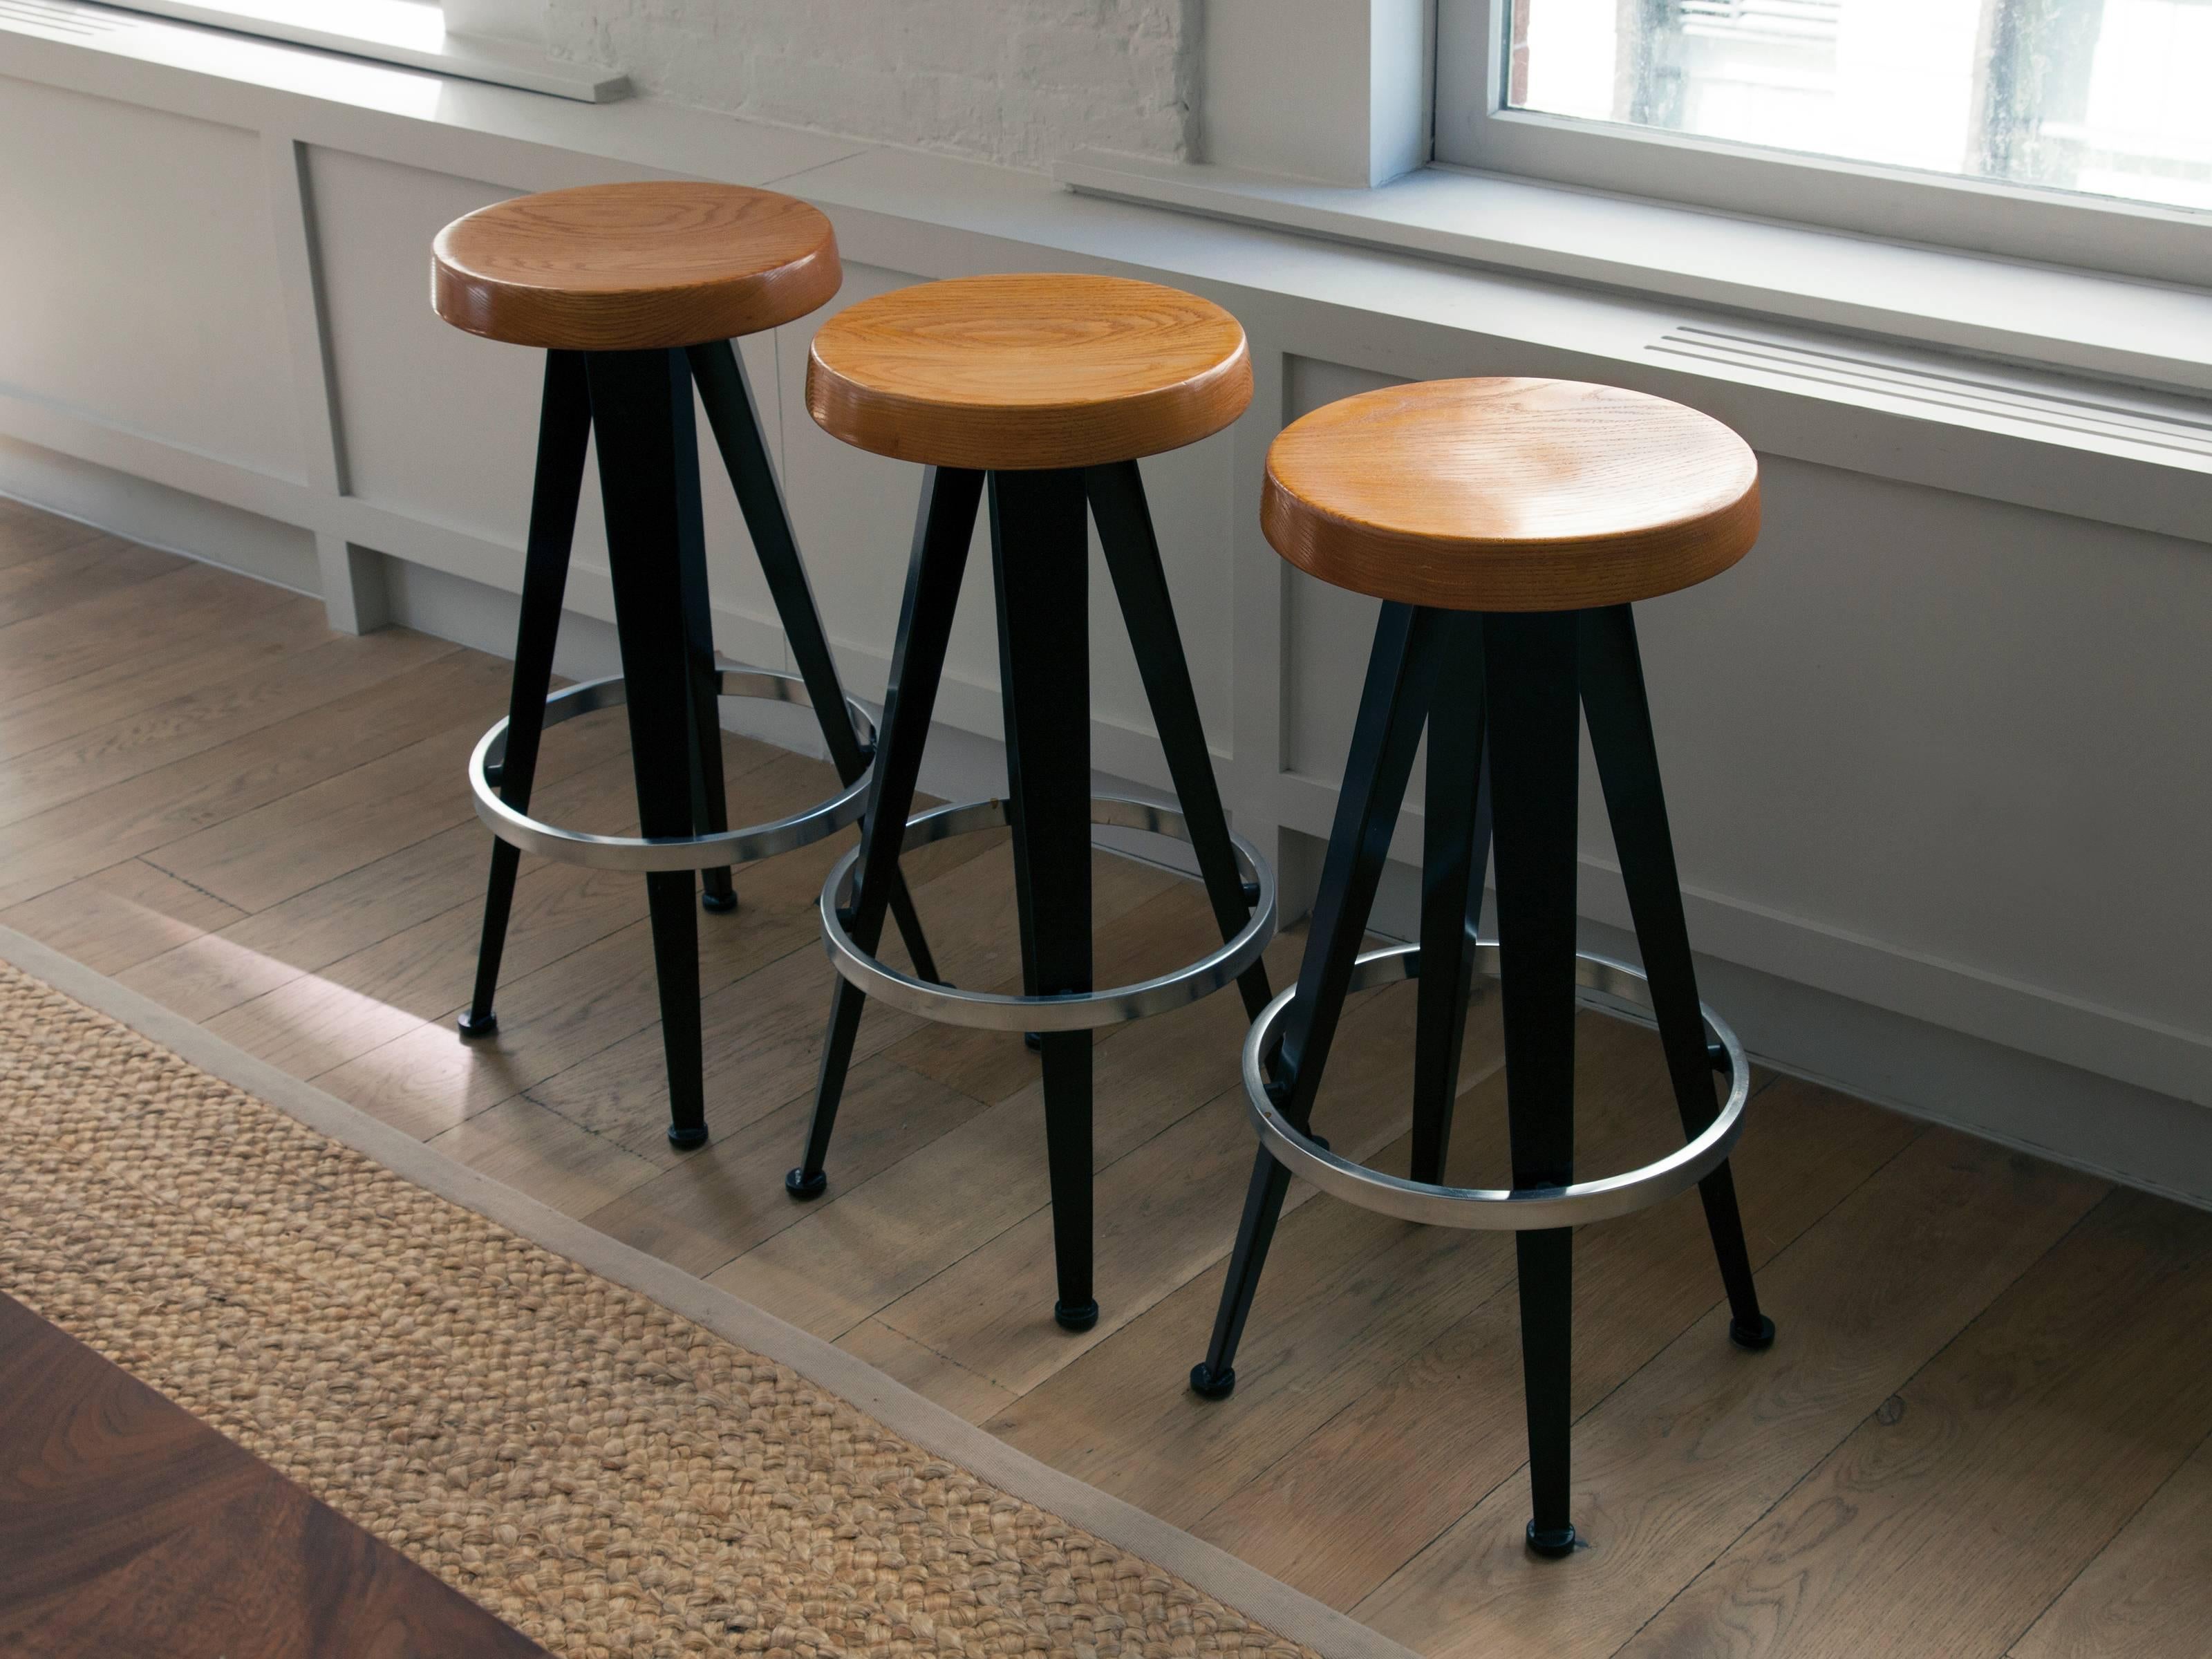 Set of three oak and steel counter stools produced after a design by Jean Prouvé in France. Provenance: Wright, Chicago. Sold only as a set.